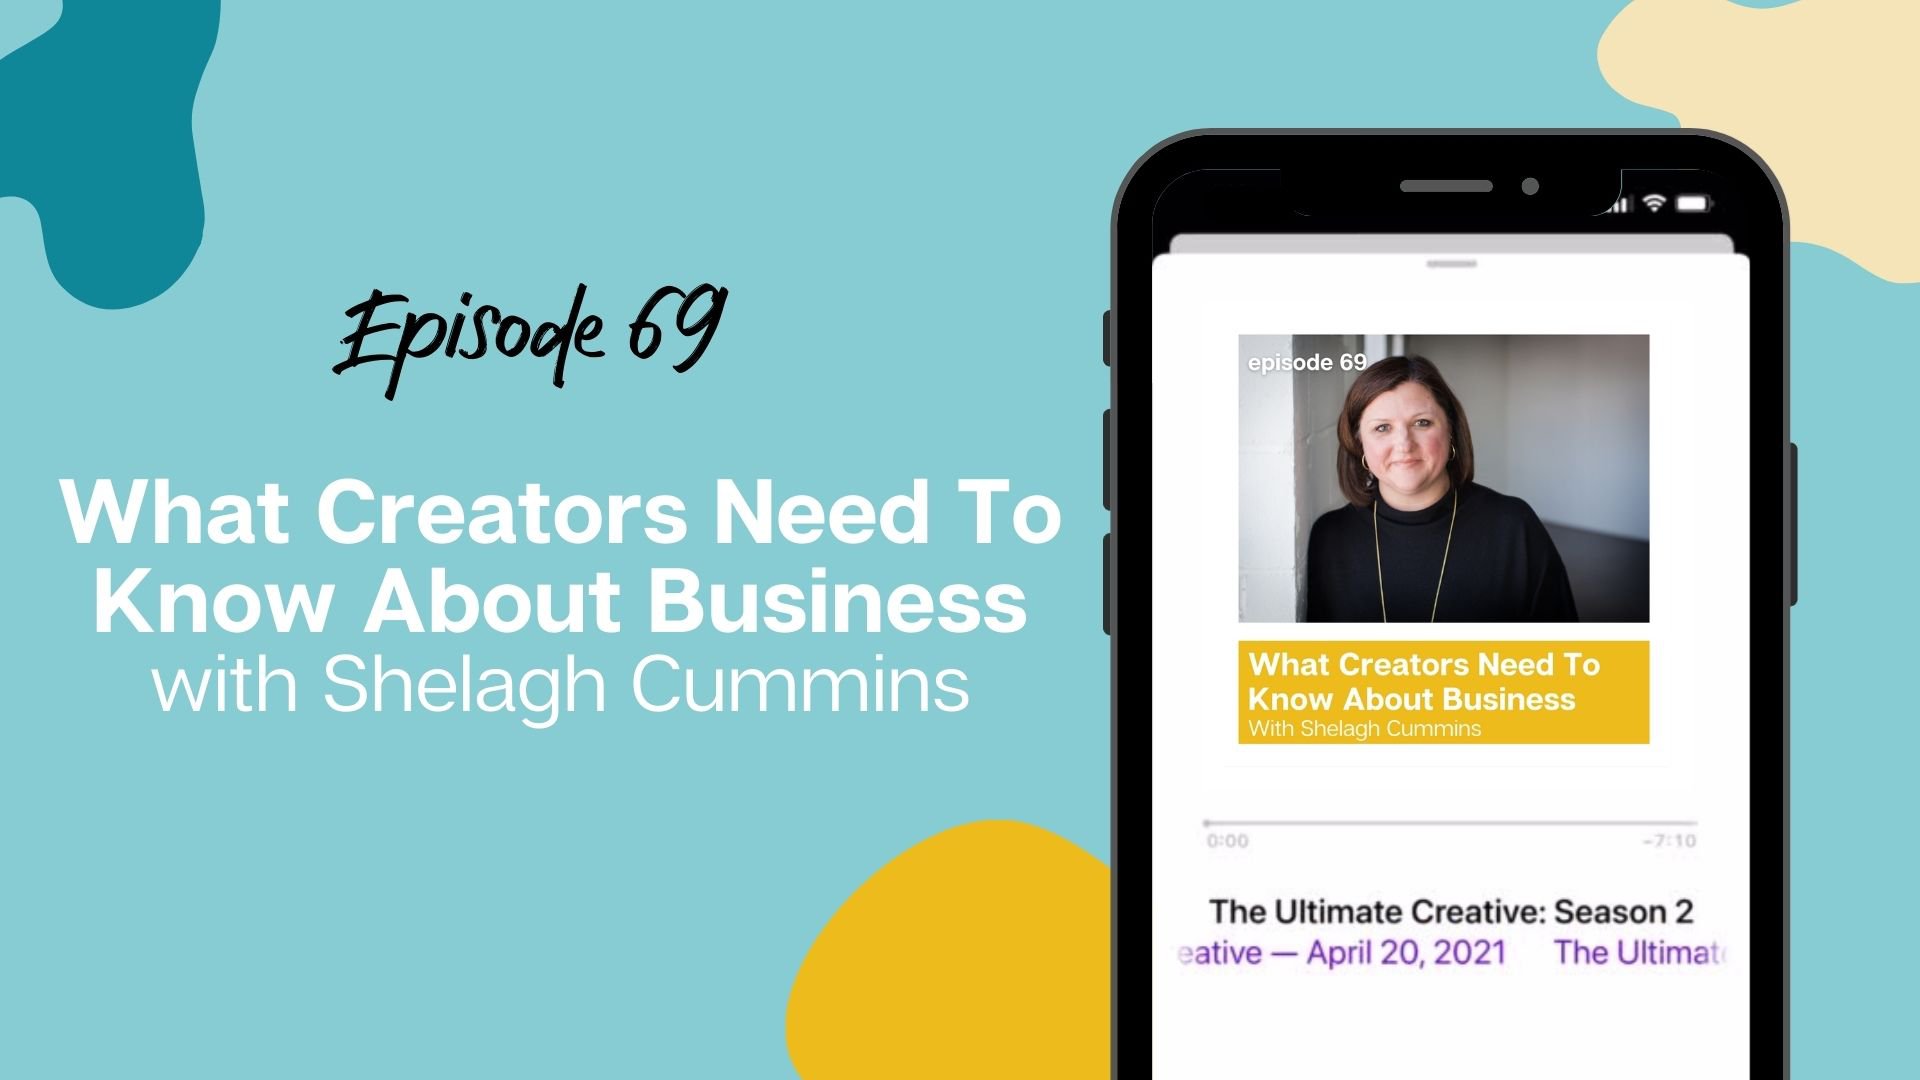 What Creators Need To Know About Business with Shelagh Cummins